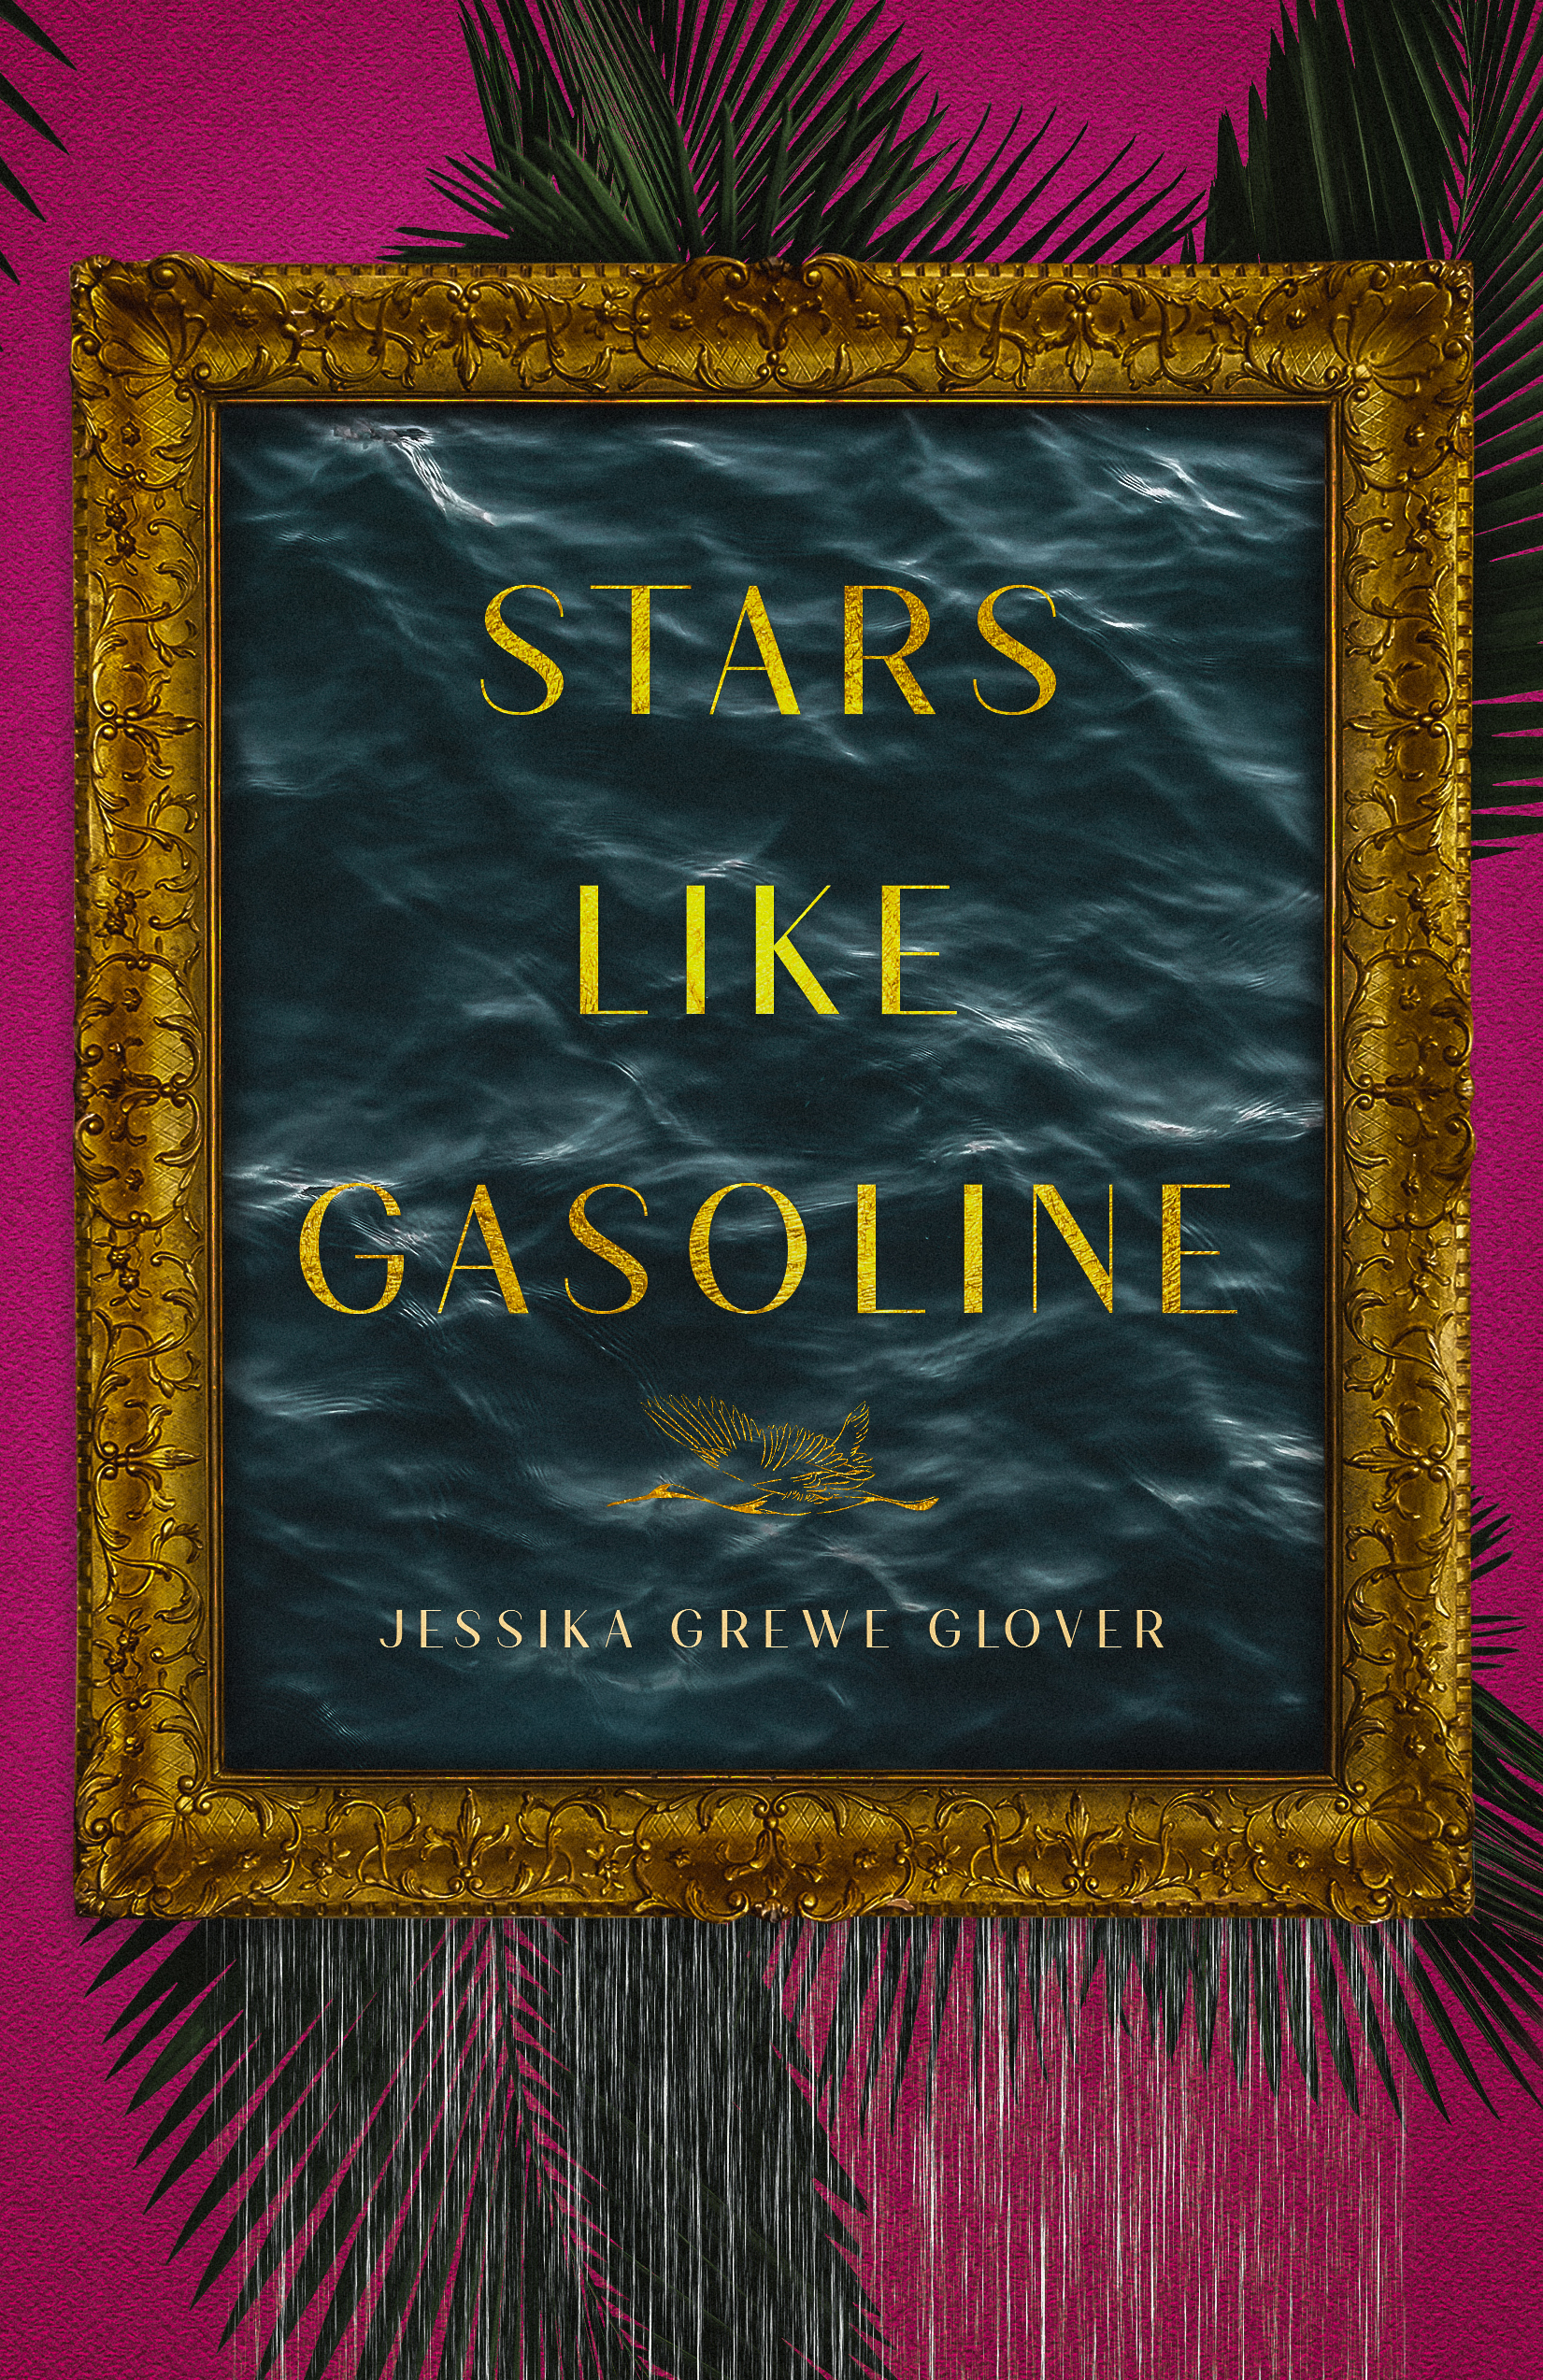 A book cover with a textured pink background and dark palm fronds in corners, a gold museum style picture frame is in middle depicting a dark sea which seems to be spilling from bottom of frame. The title, Stars Like Gasoline is written in the middle 